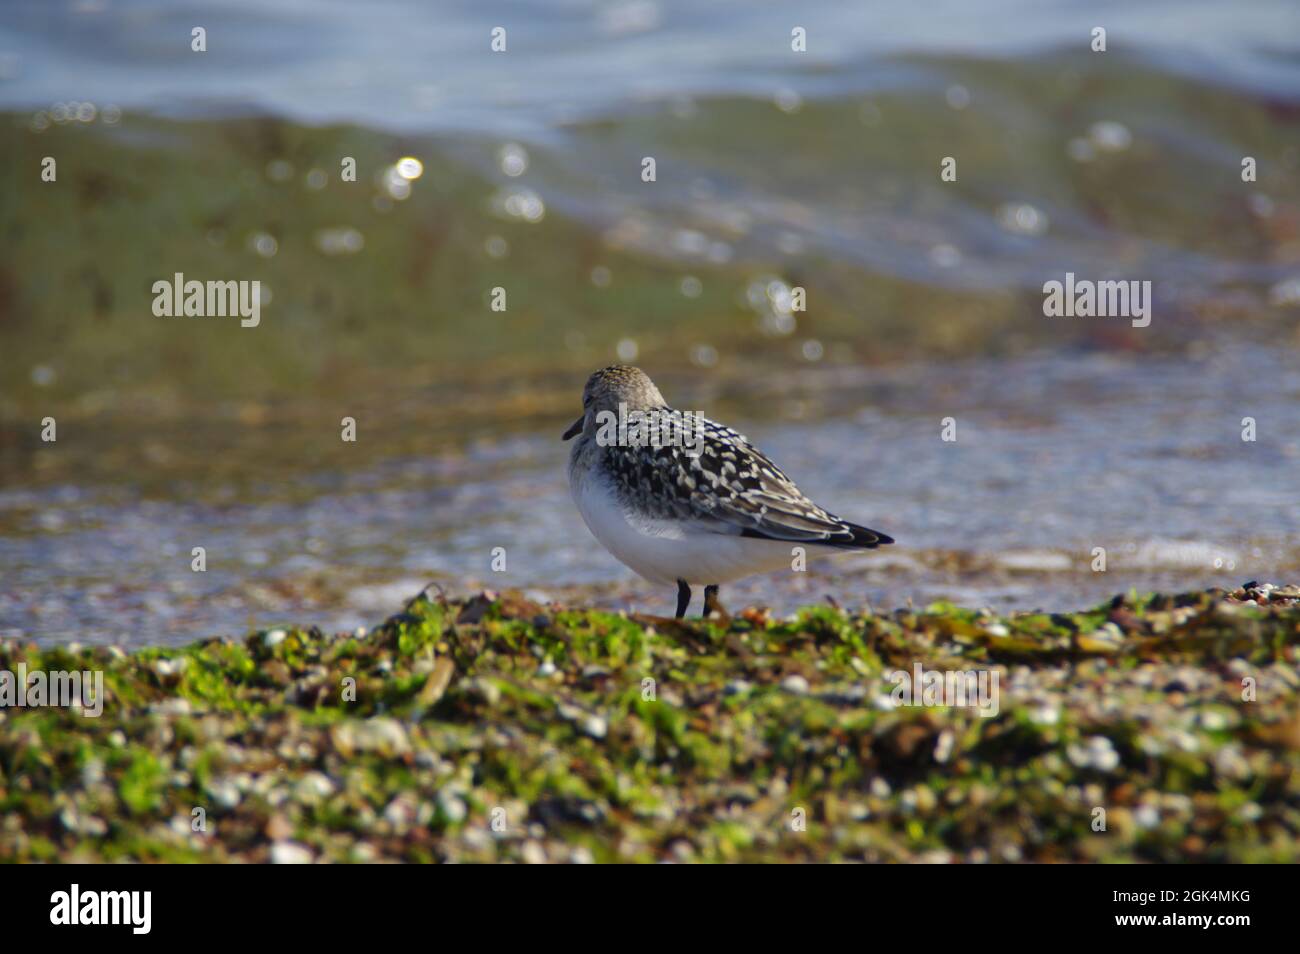 Purple sandpiper on the sea shore. Little wild bird on sand. Wildlife and environment at the Baltic seaside. Stock Photo